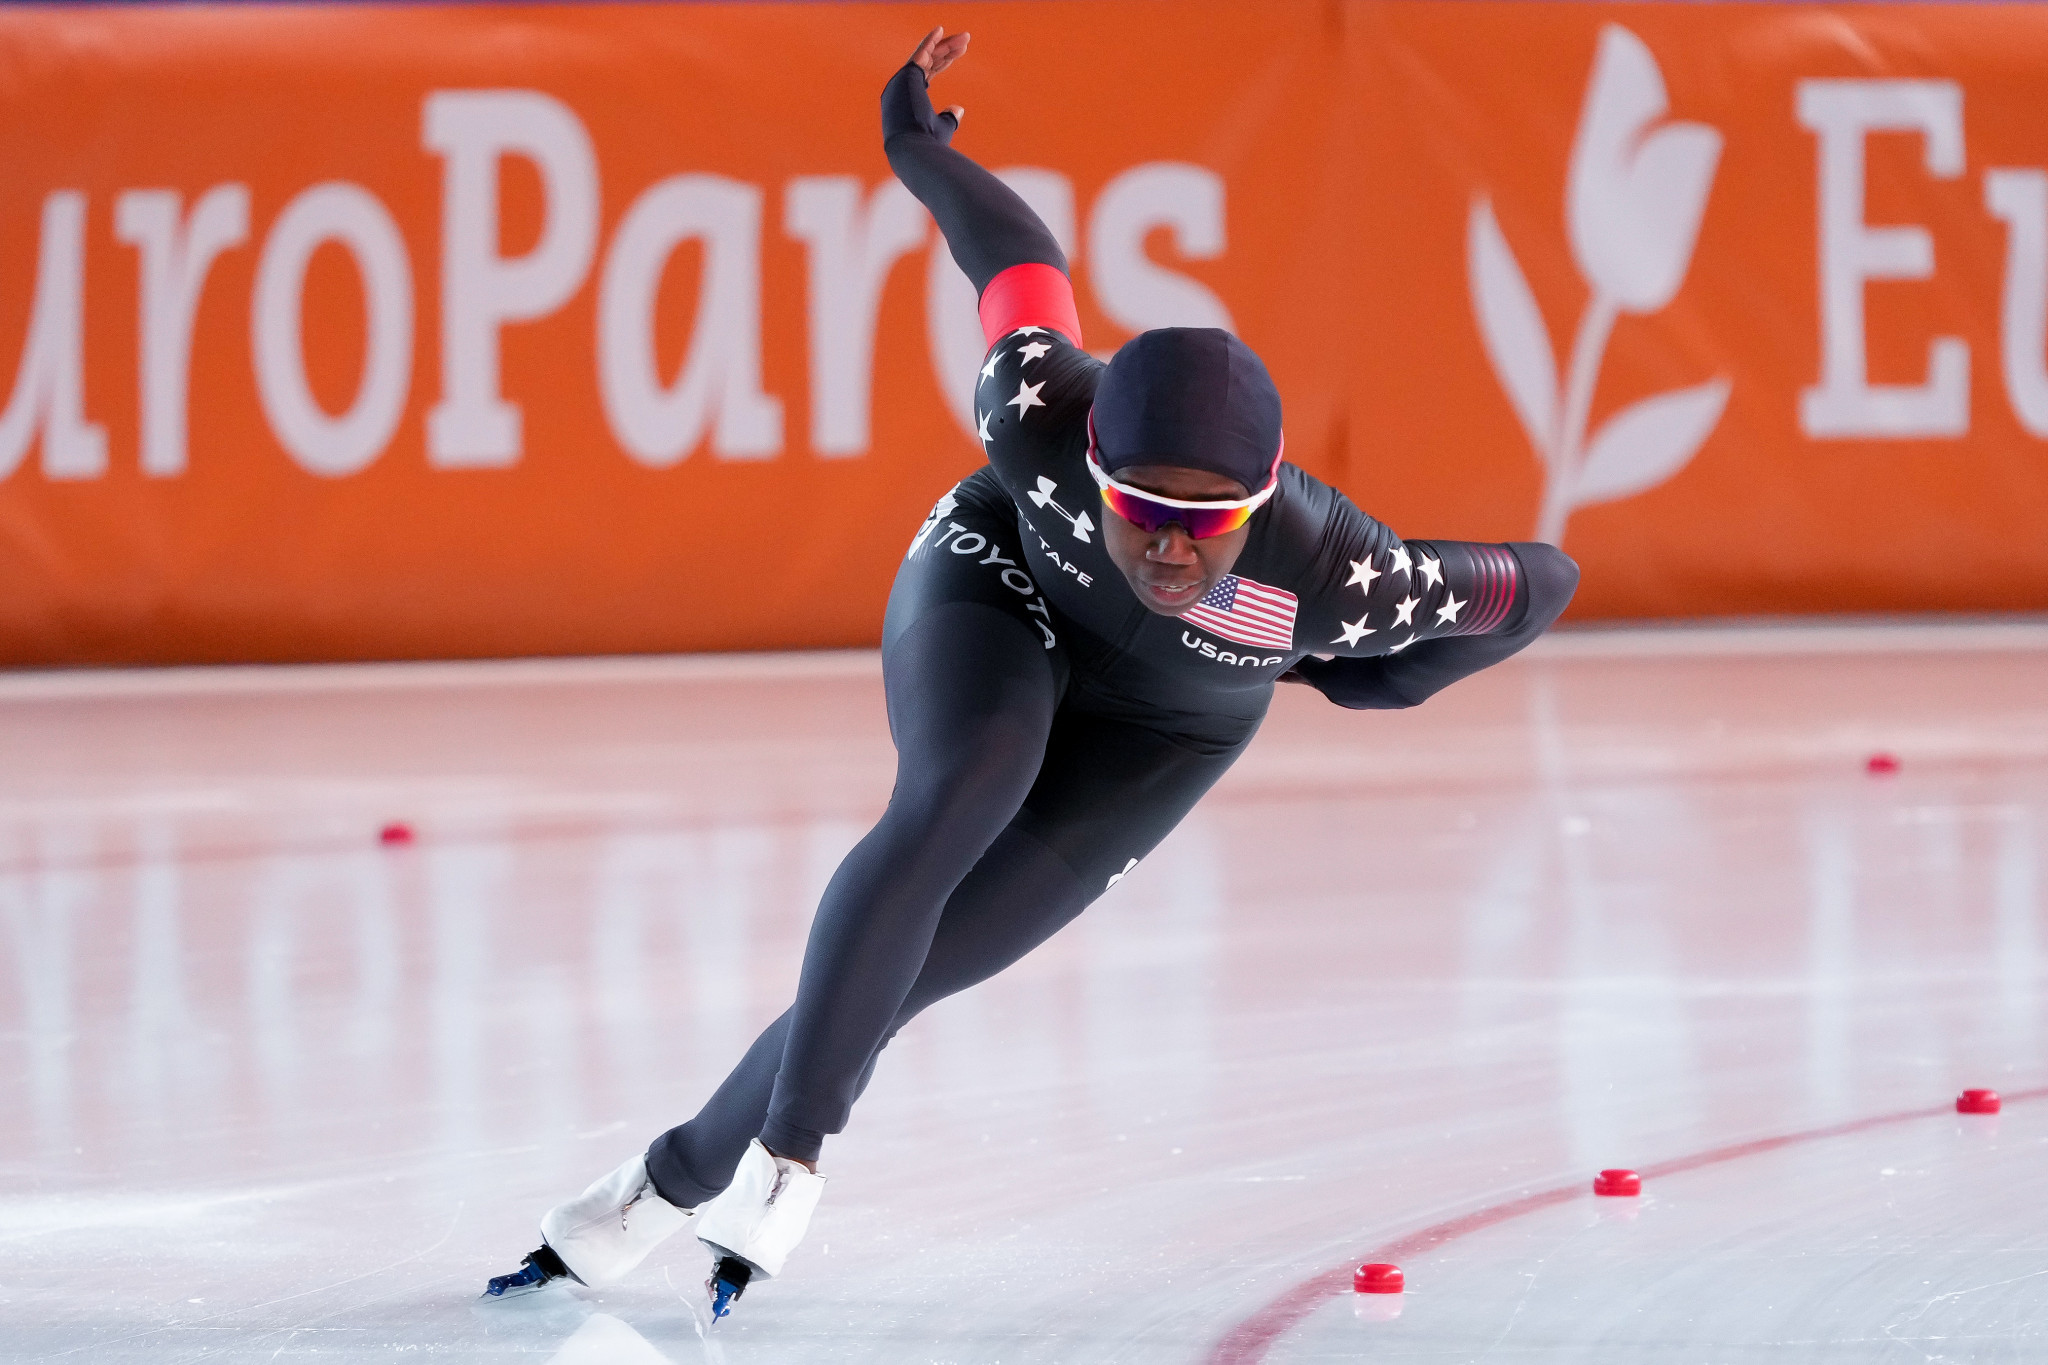 The United States' Erin Jackson said she was "kind of disappointed" with her time, despite winning her third women's 500m event of the season ©Getty Images